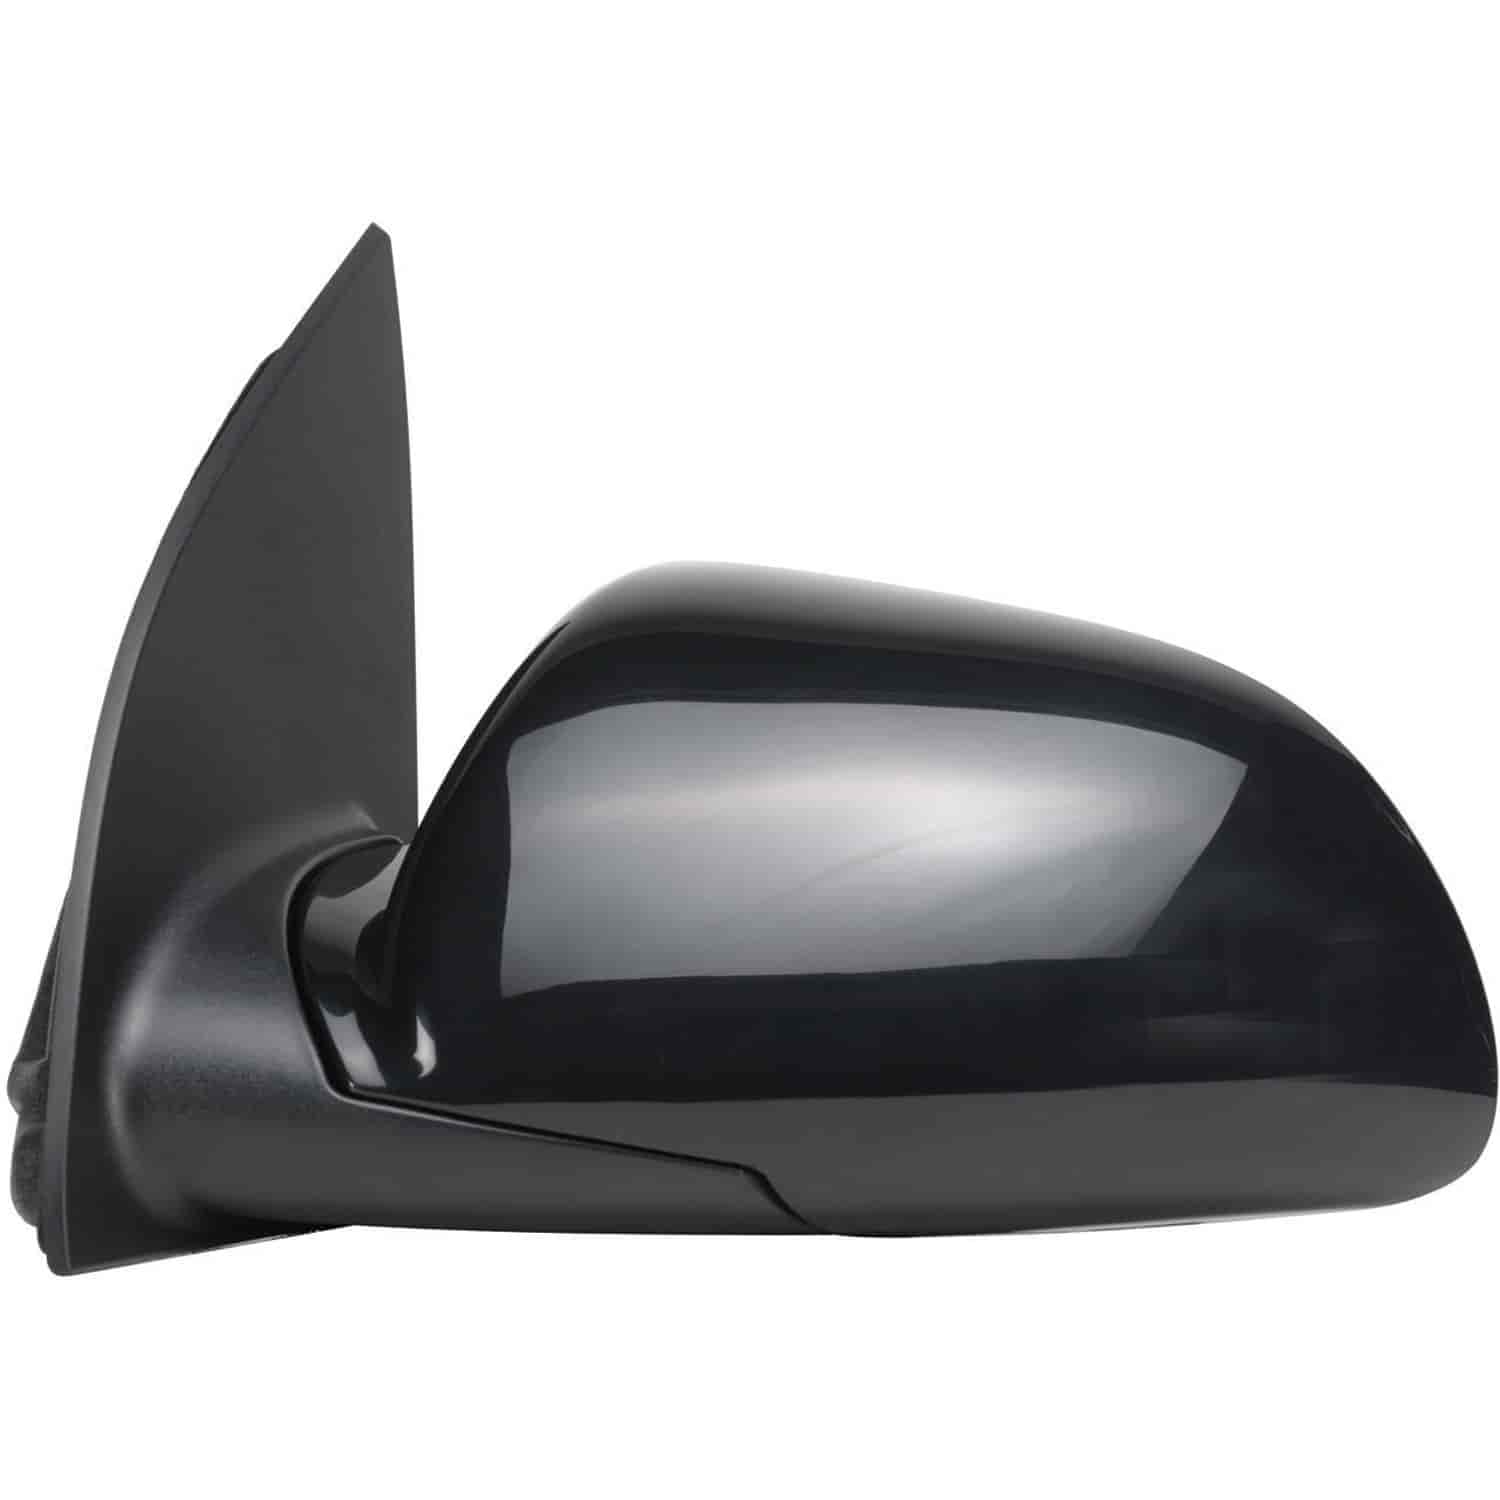 OEM Style Replacement mirror for 04-09 Saturn VueP.m.